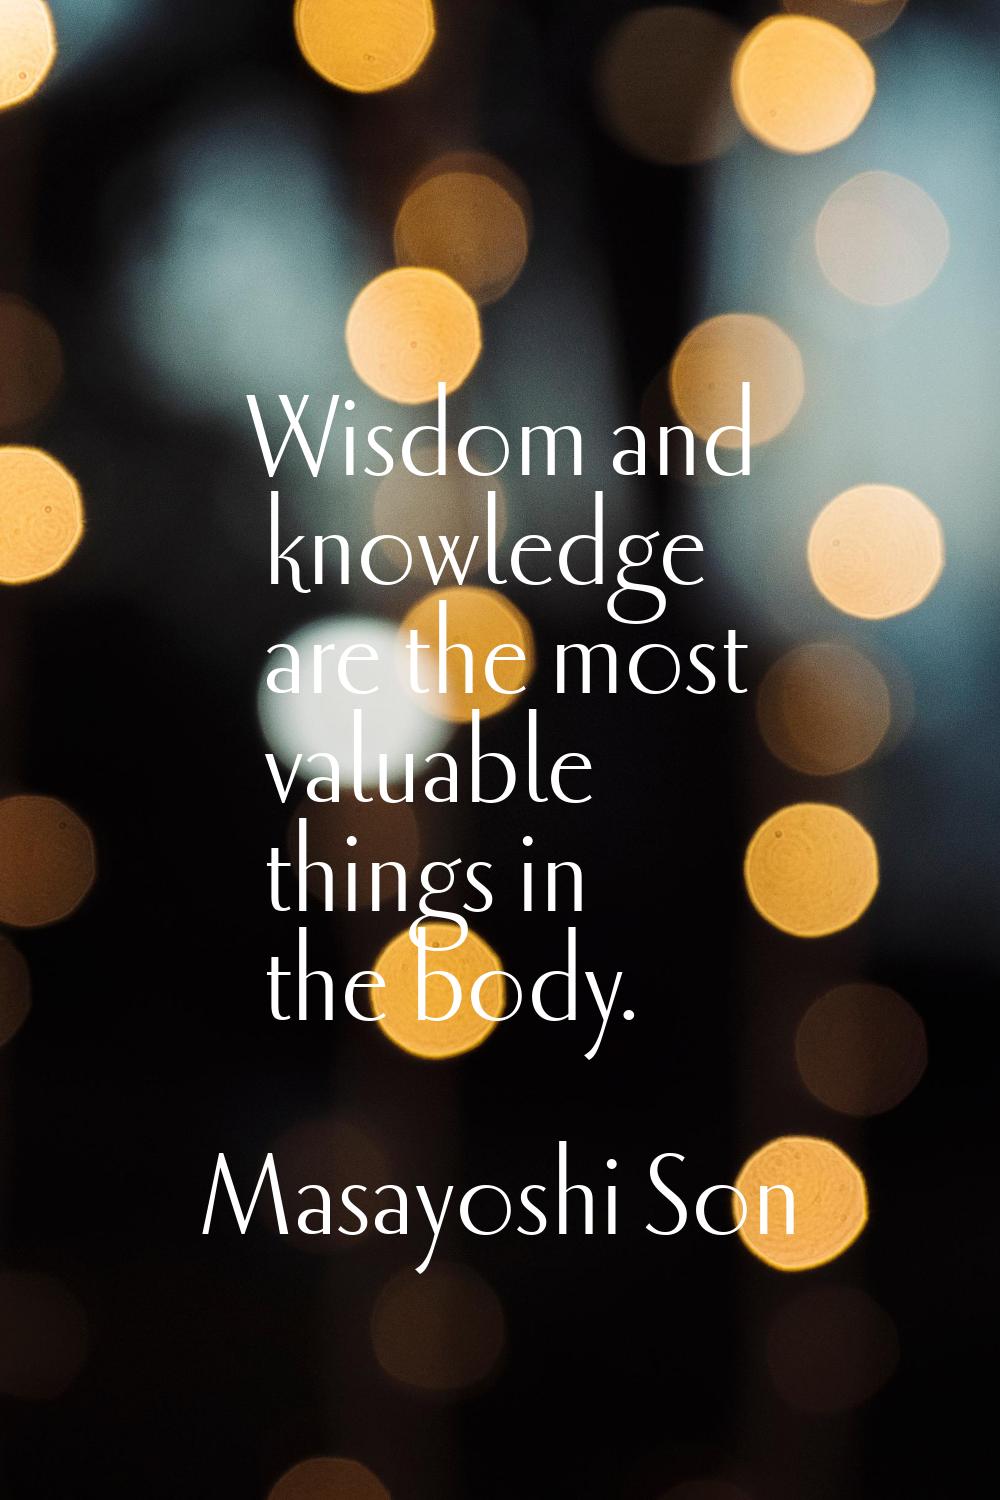 Wisdom and knowledge are the most valuable things in the body.